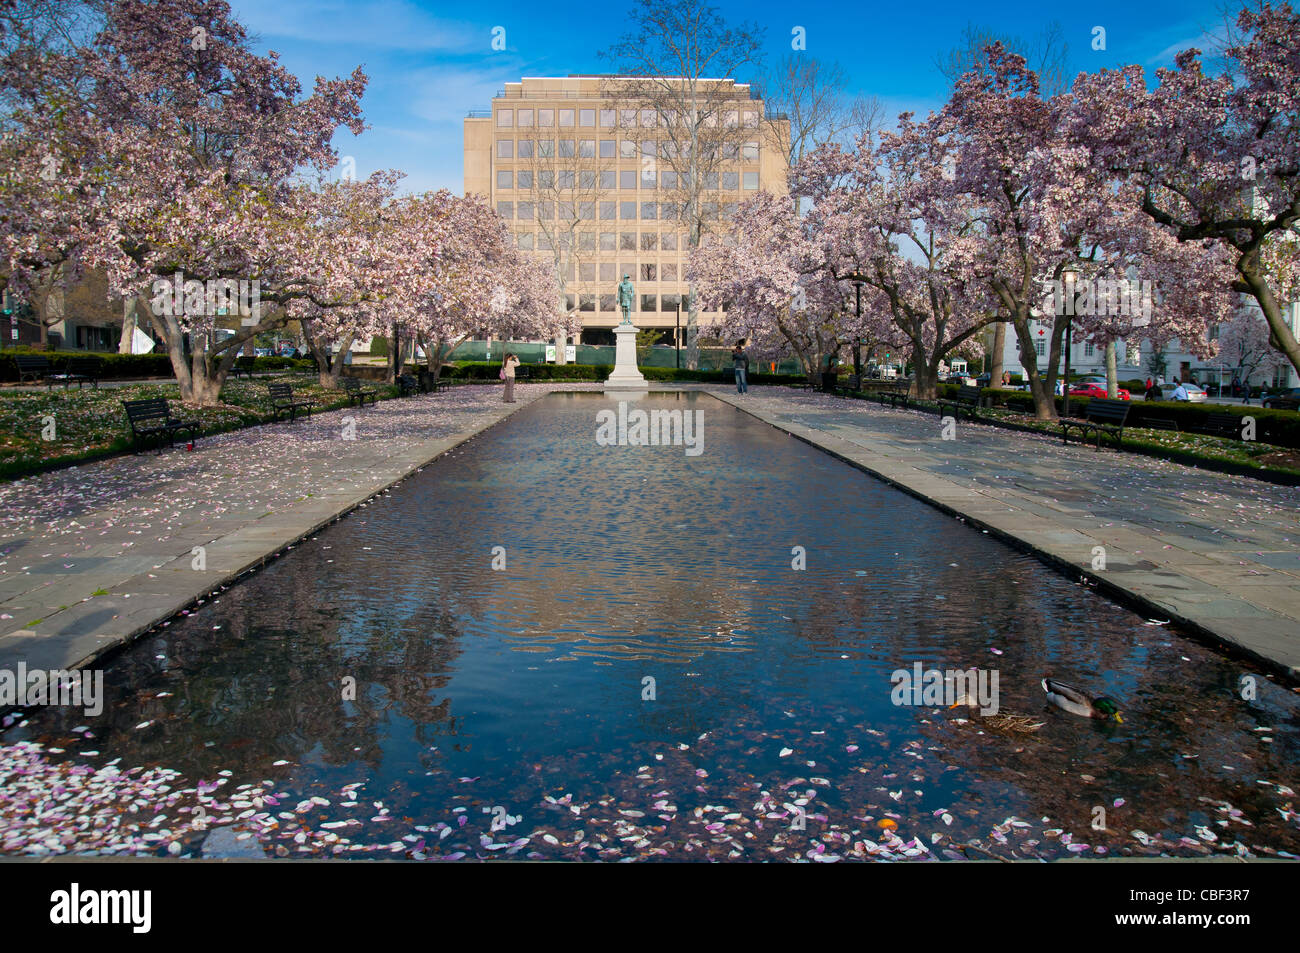 Rawlins Park in Washington DC in spring cherry blossoms Stock Photo